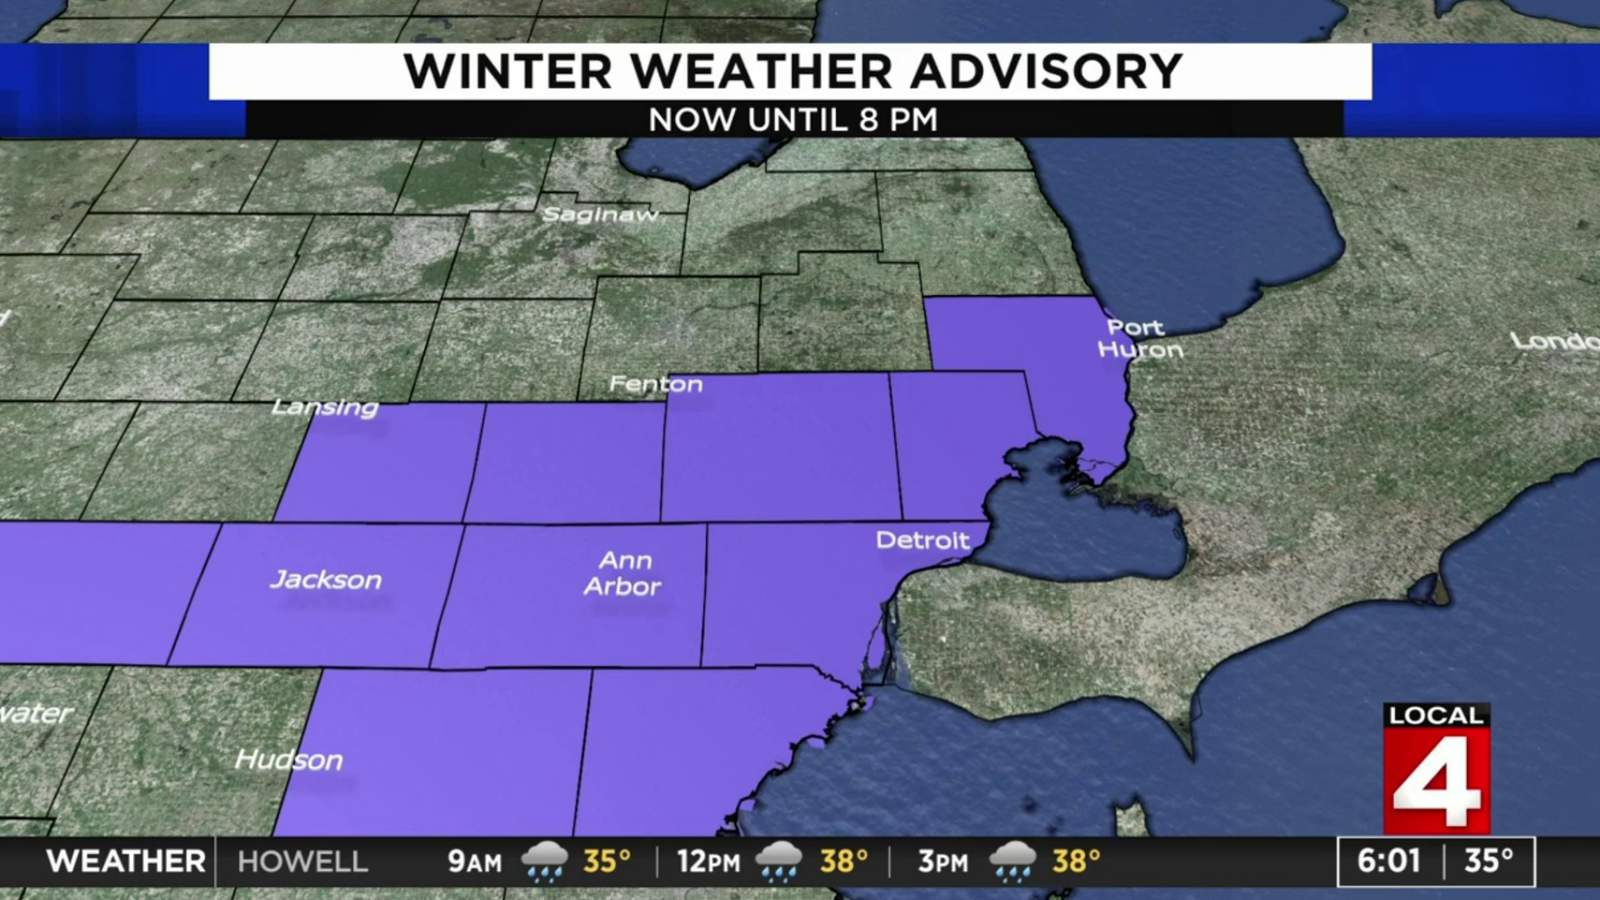 Winter weather advisory issued for Metro Detroit, counties outside region